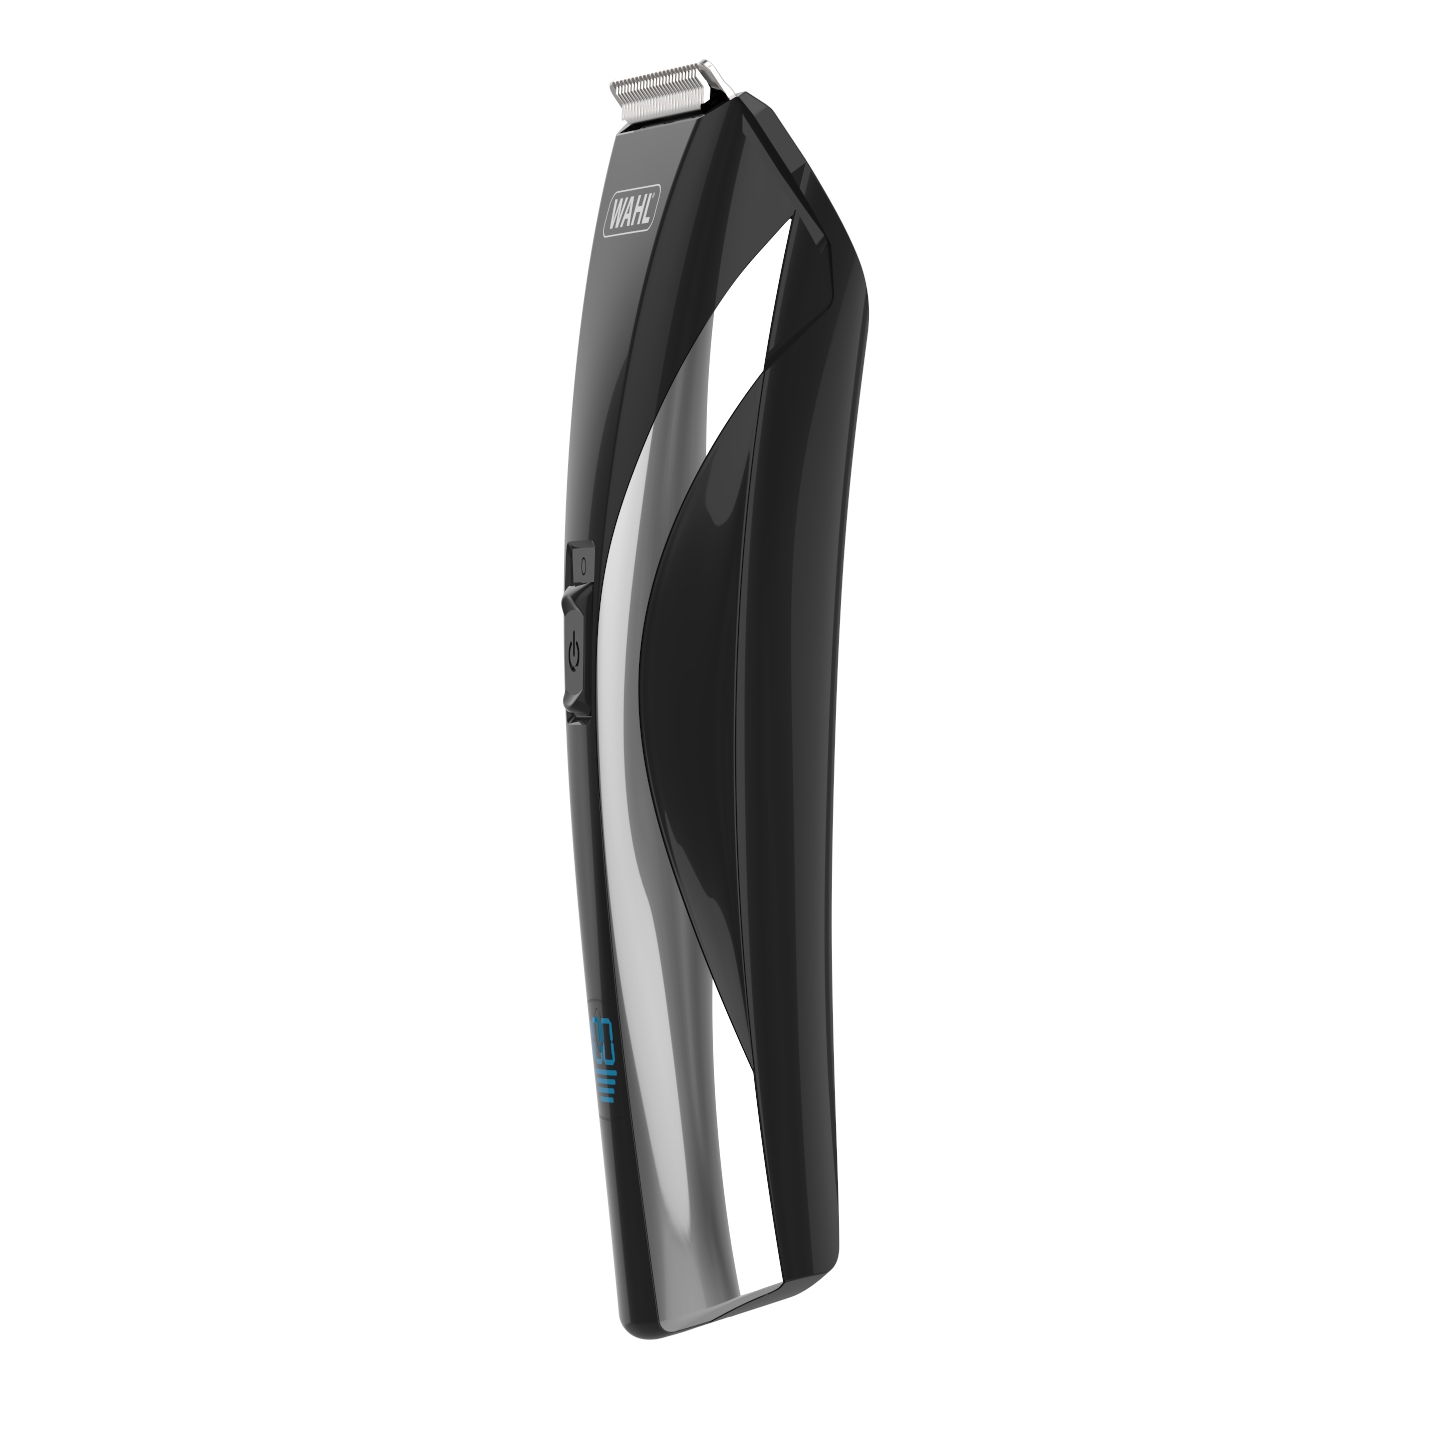 wahl action pro vision hair clipper